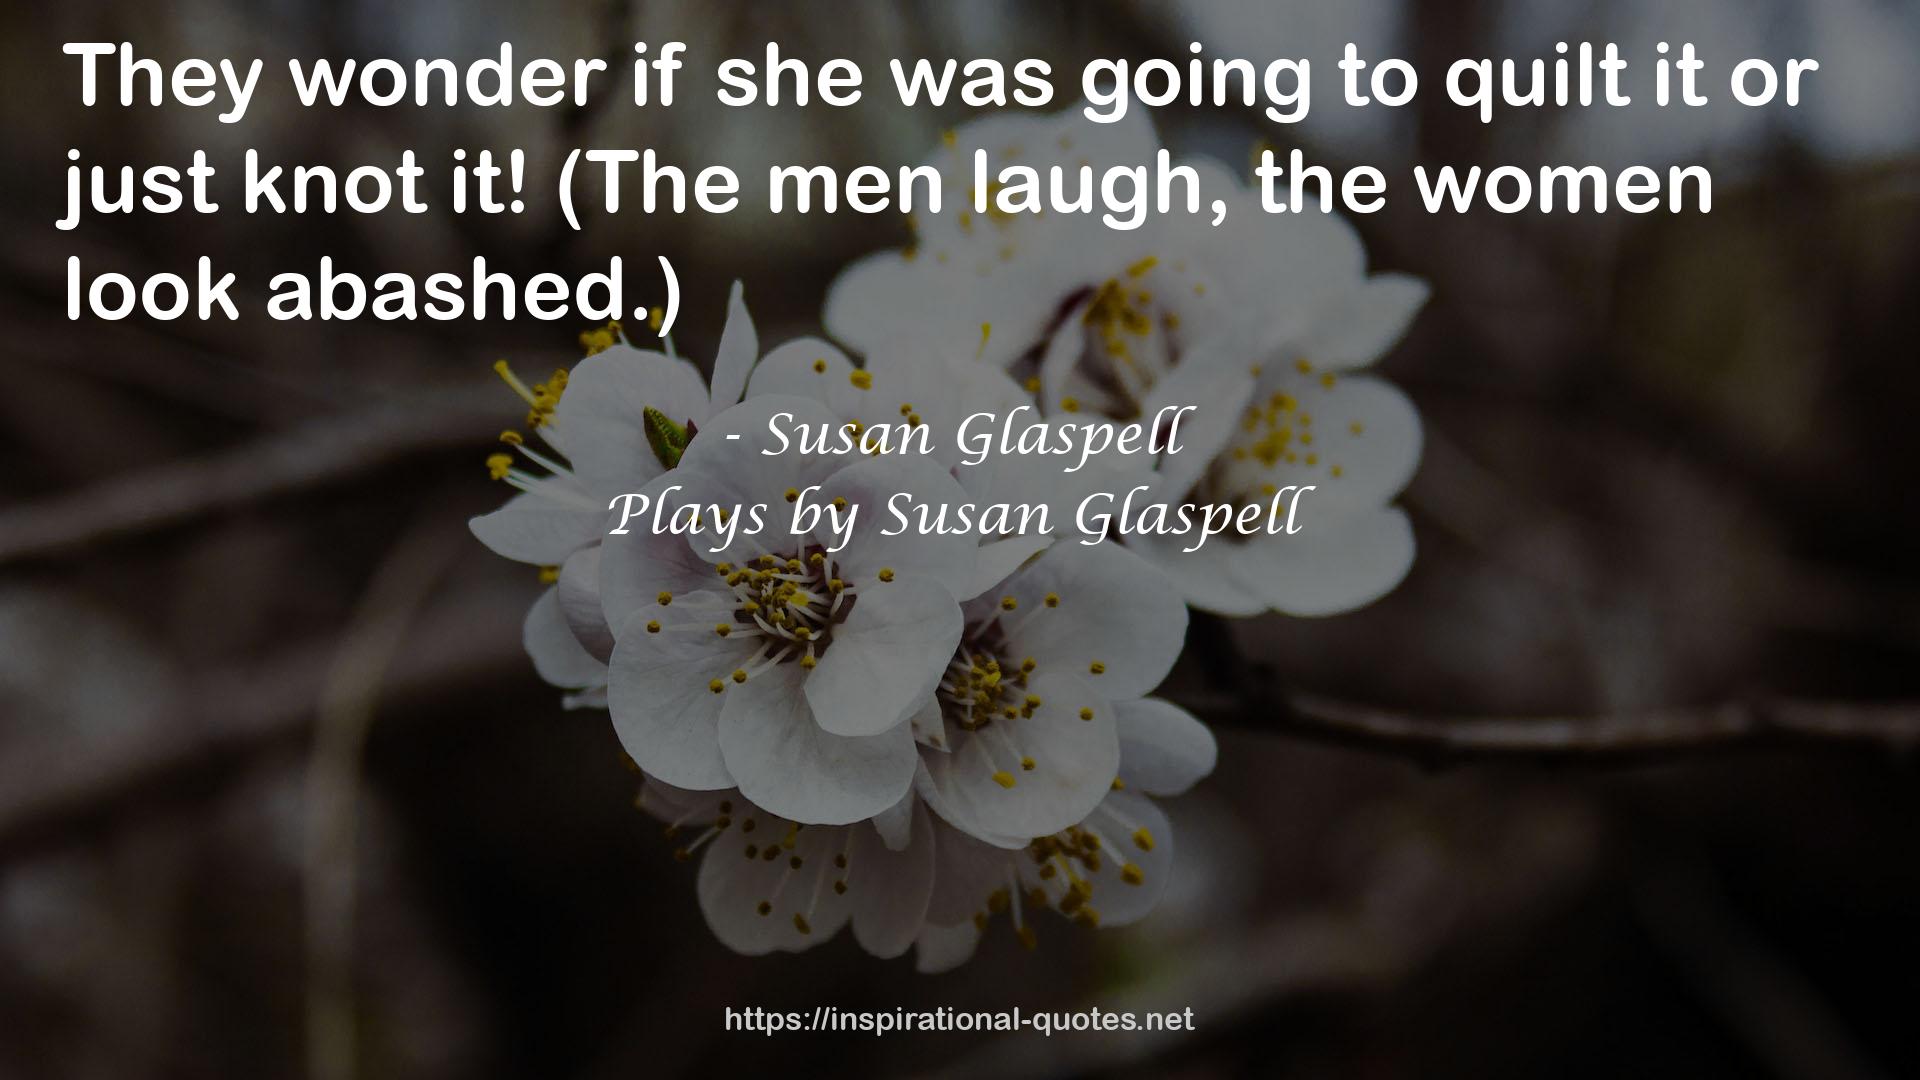 Plays by Susan Glaspell QUOTES